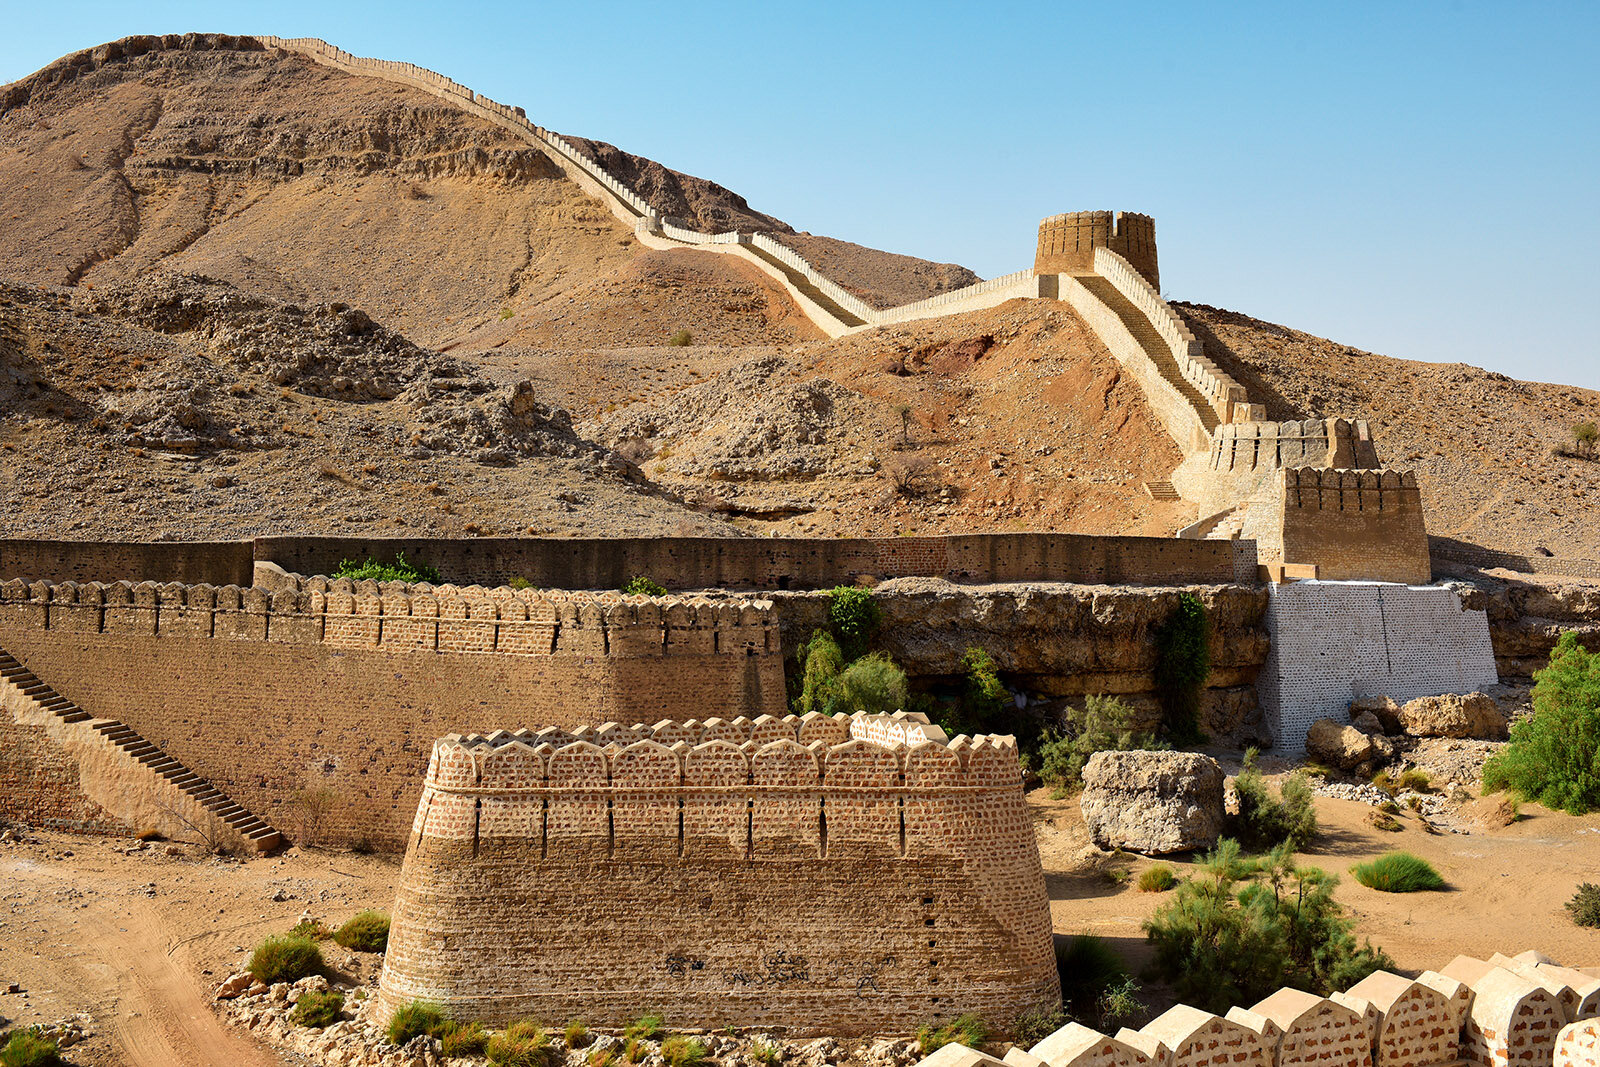 Ranikot Fort - The Great Wall of Sindh